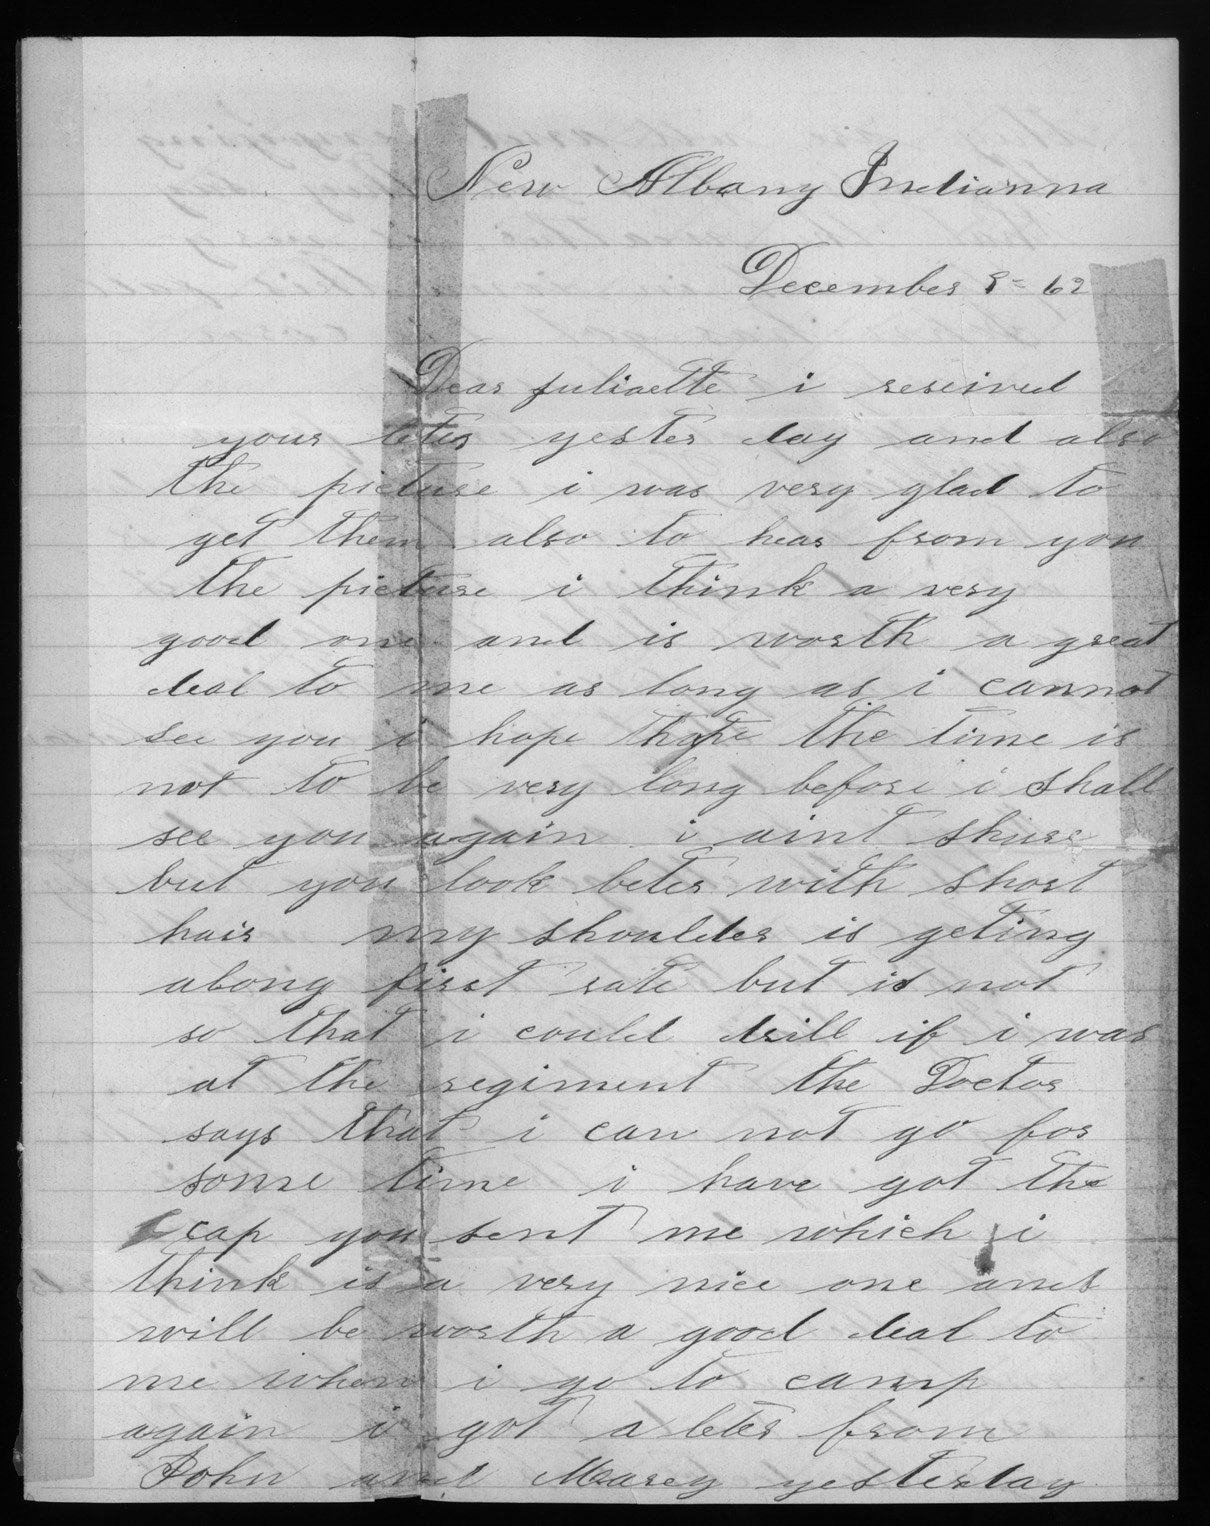 Letter, Charles Caley, New Albany, Indiana, to Juliaette Caley